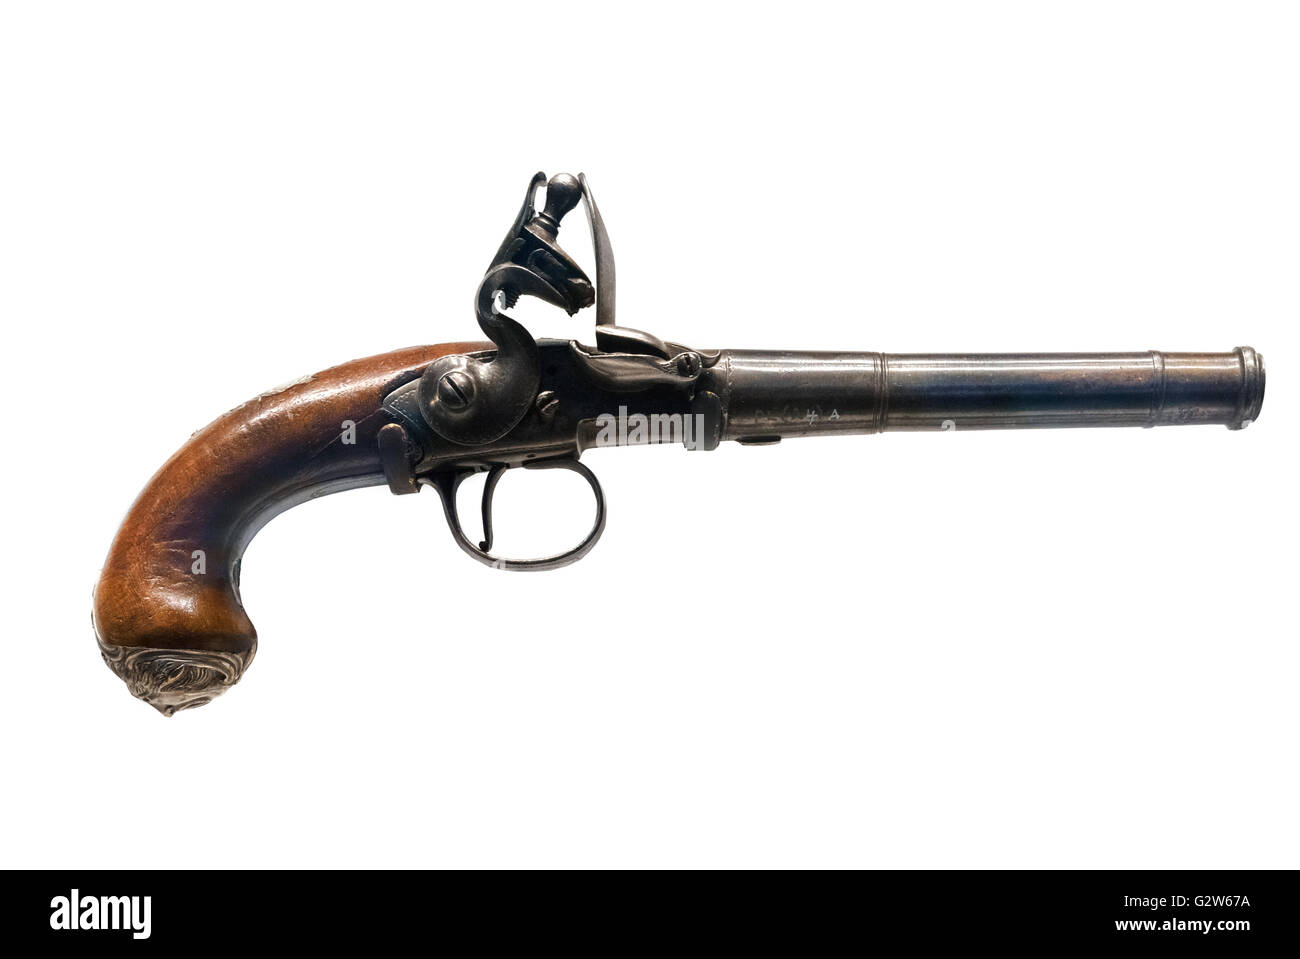 One of apair of flintlock pistols said to have been given by Captain Thomas Hardy to Admiral Nelson.  Although the pistols are inscribed  'To Adm Lord Nelson/From his Friend/Captain Hardy/June 18 - 1801', there is doubt as to the authenticity of this inscription. Made by B Griffin, c.1760. Stock Photo